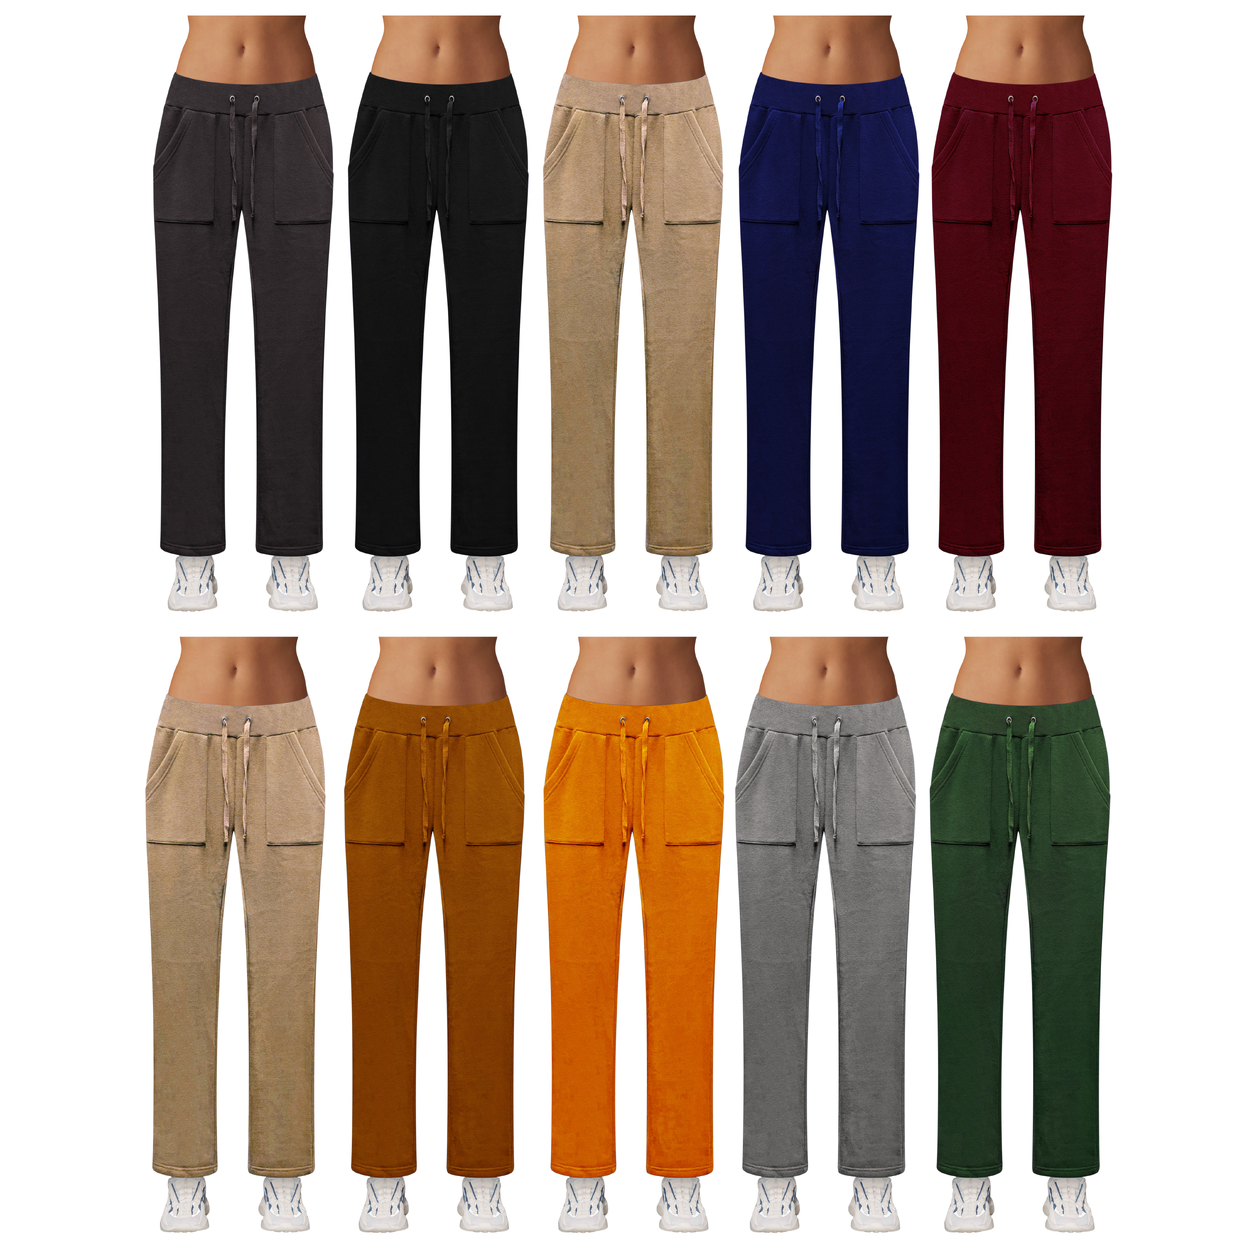 Multi-Pack: Women's Ultra-Soft Cozy Fleece Lined Elastic Waistband Terry Knit Pants - 1-Pack, Small